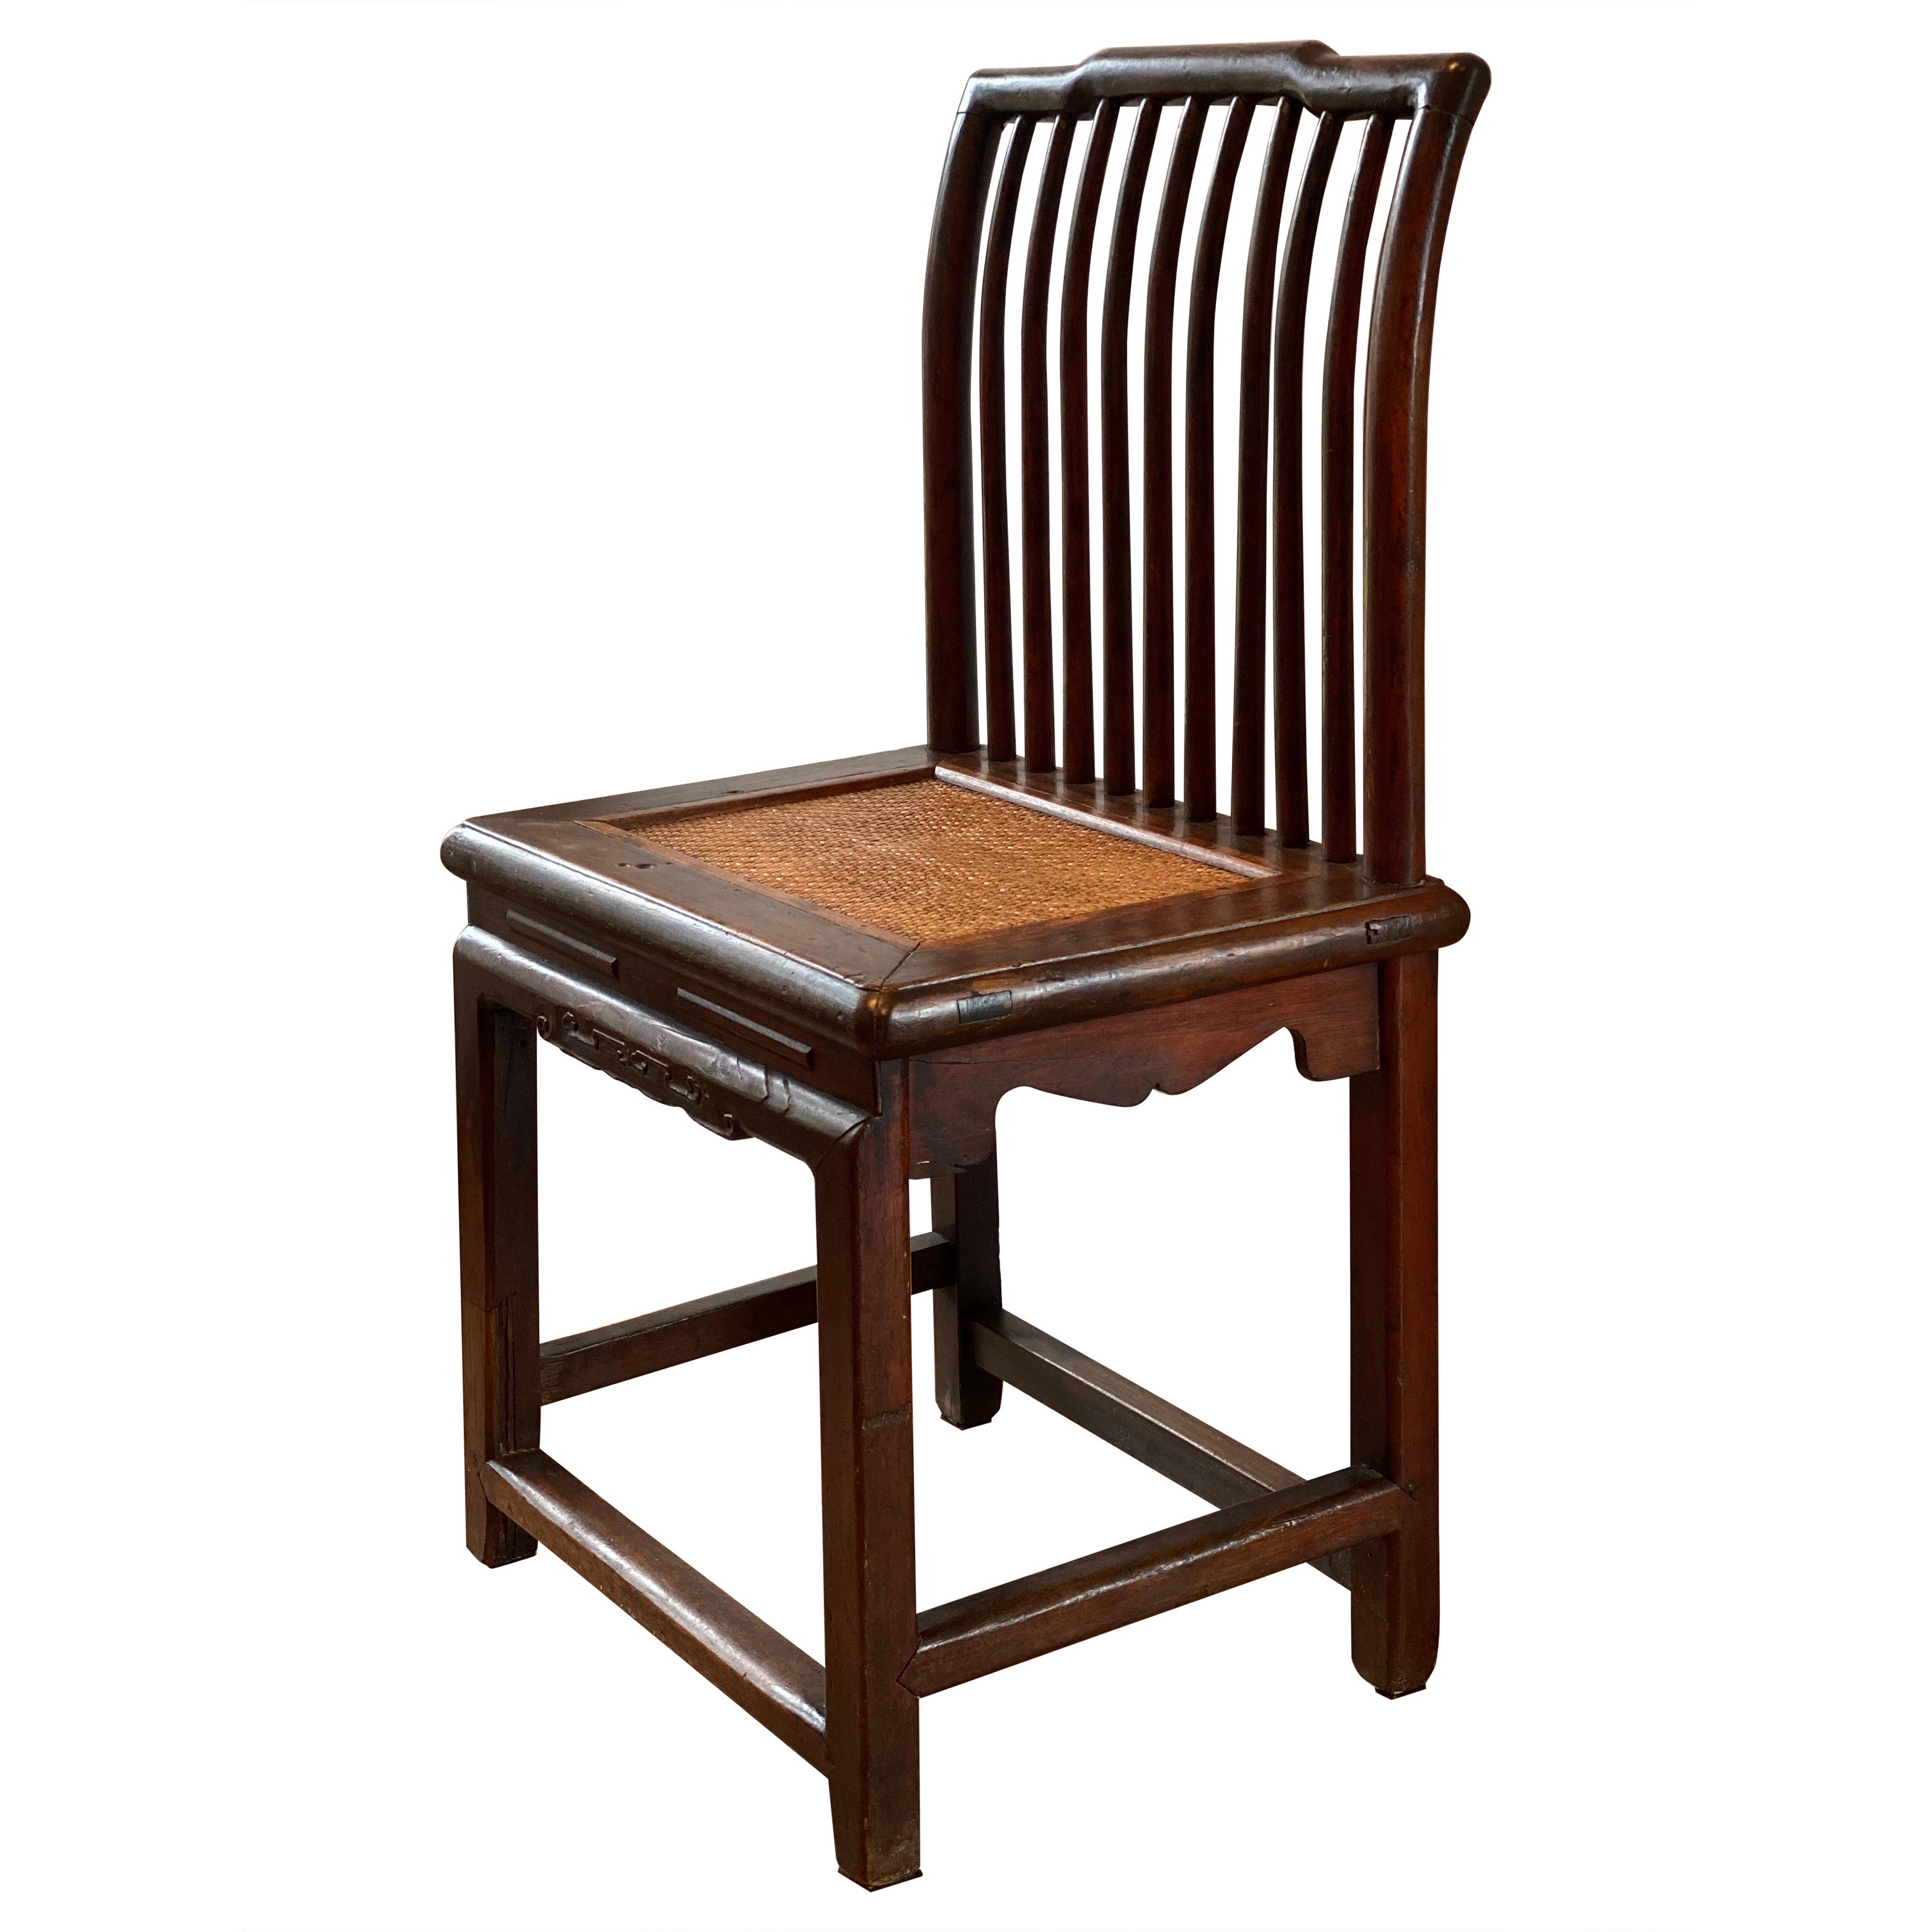 Chinese Huanghuali (Rosewood) Spindle Back Chair, Meiguiyi, 18th/19th Century For Sale